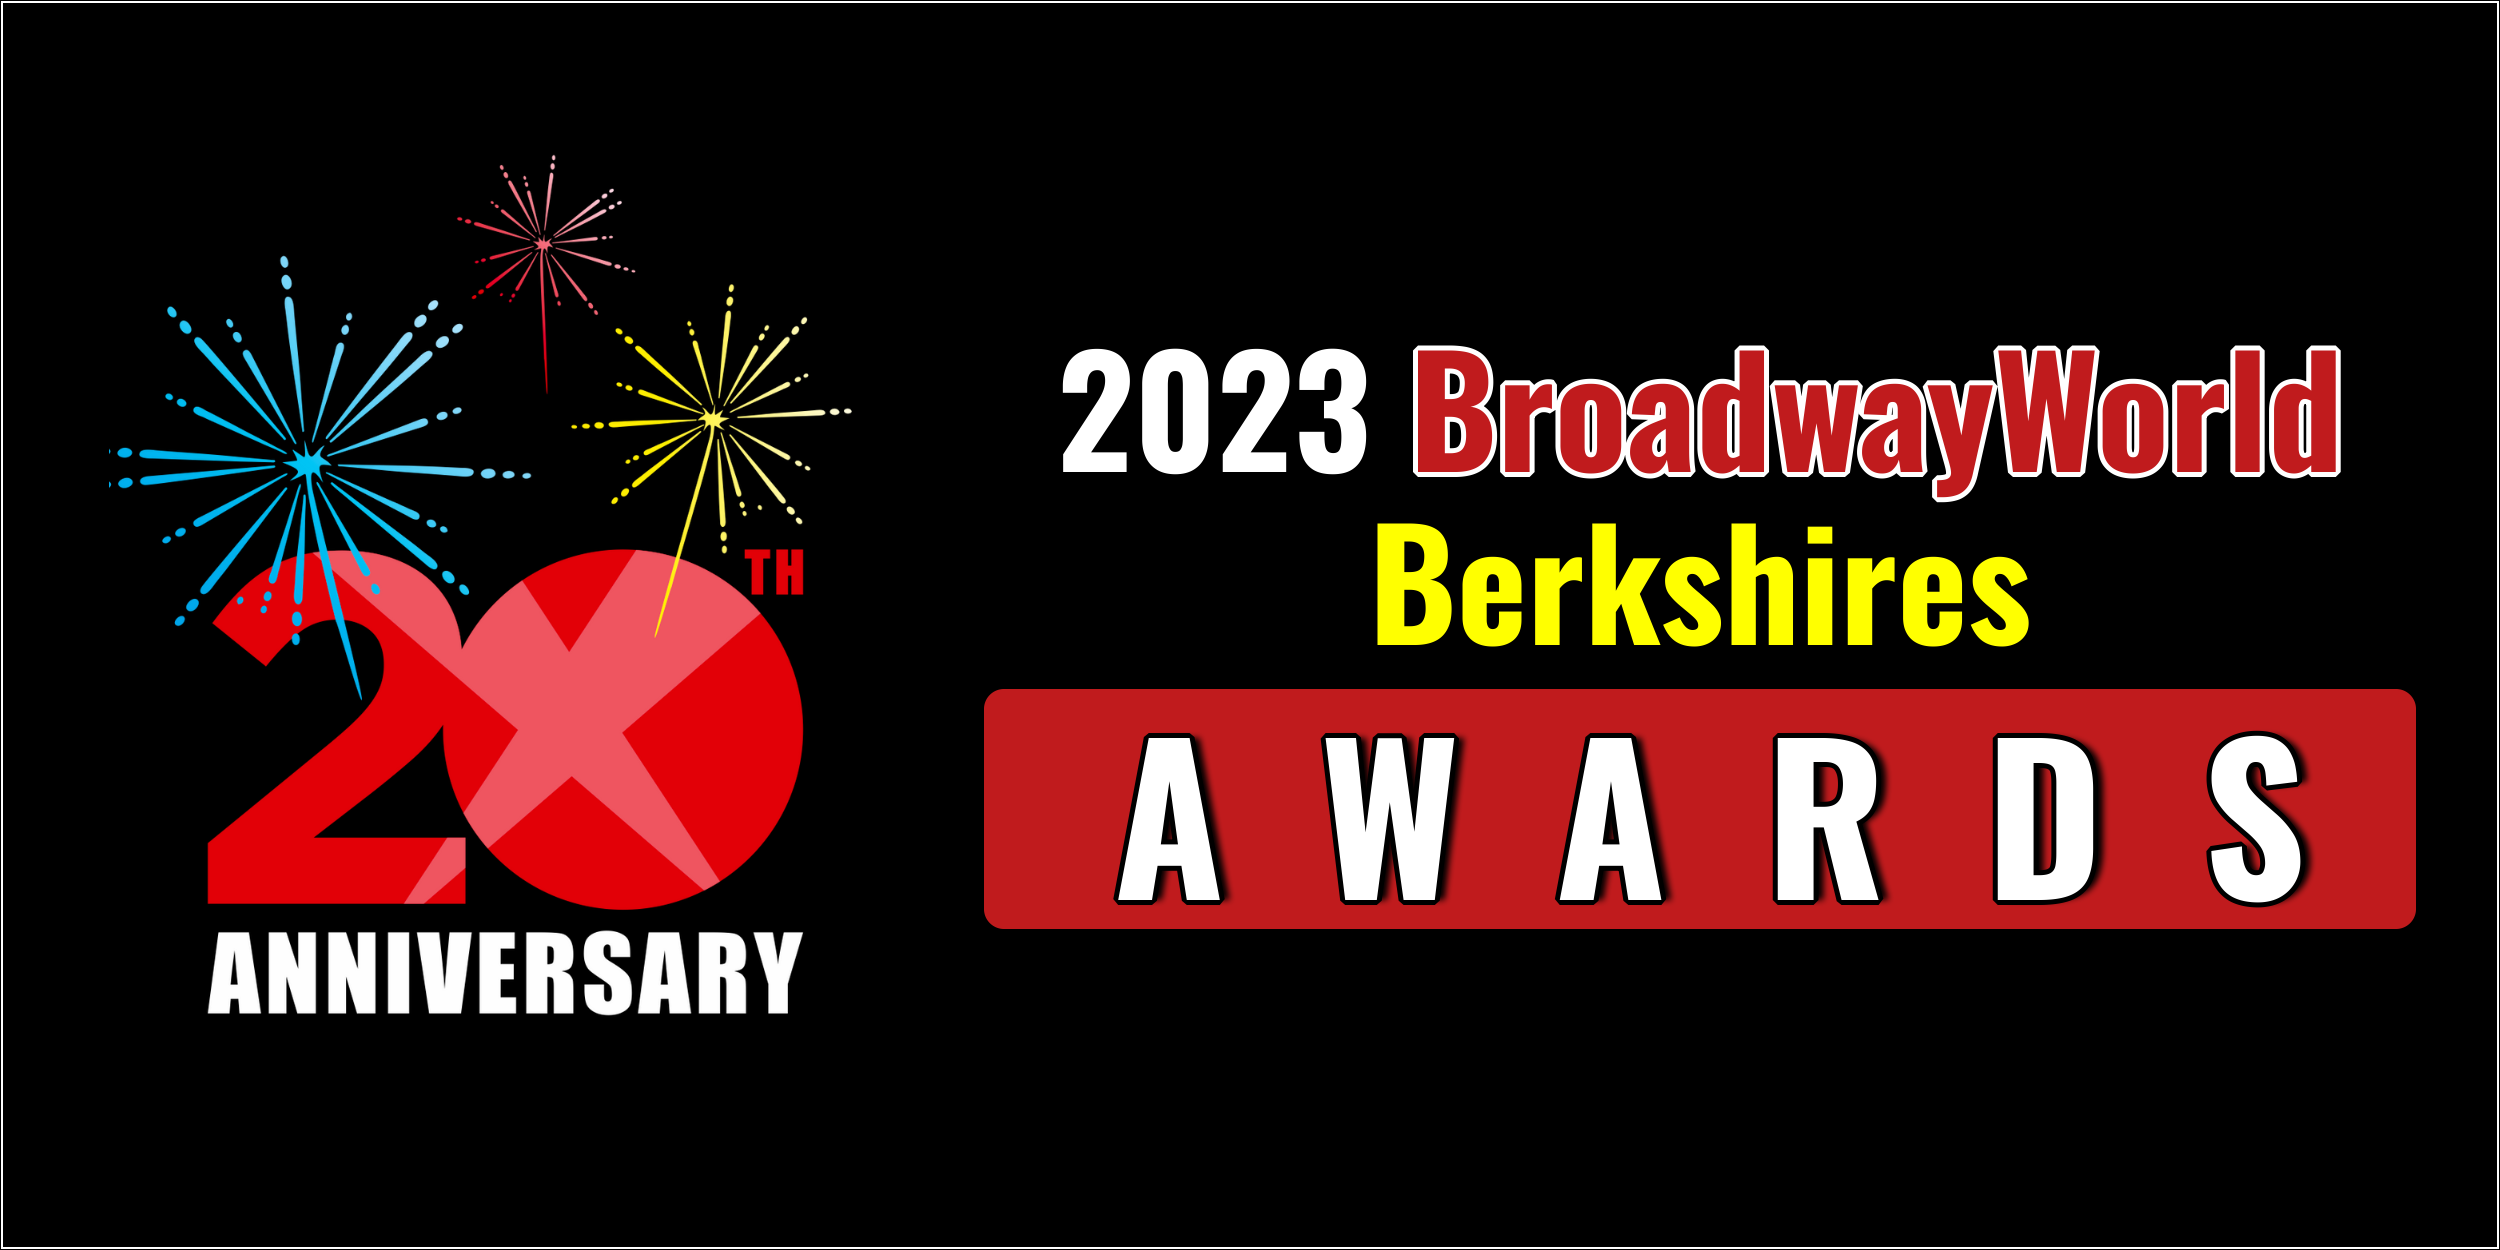 Latest Standings Announced For The 2023 BroadwayWorld Berkshires Awards; A MIDSUMMER NIGHT'S DREAM Leads Best Play!